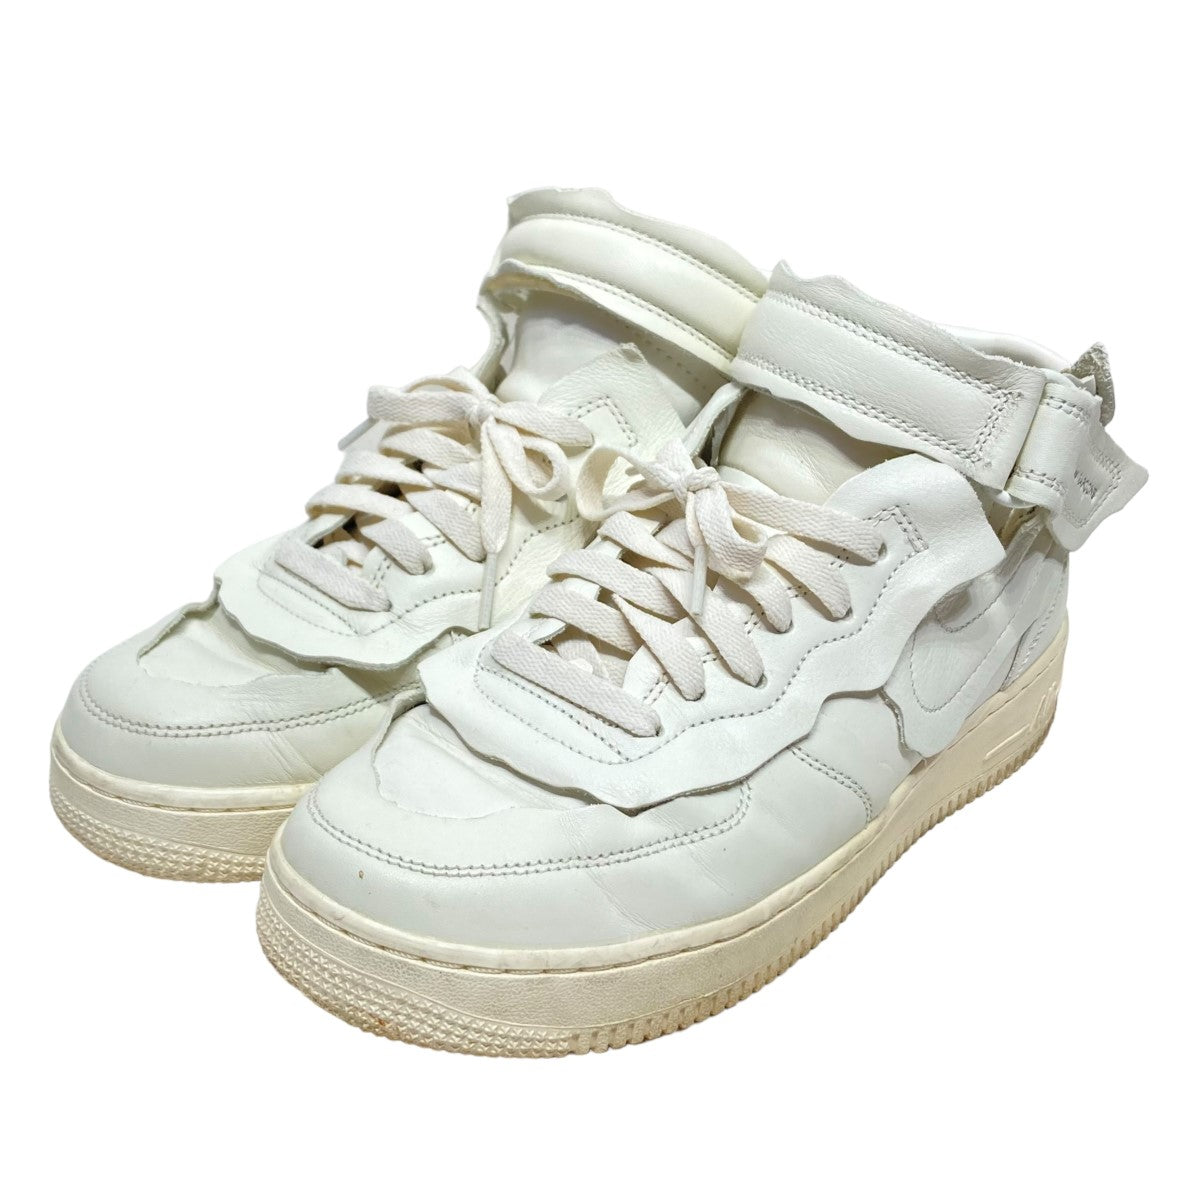 NIKE×COMME des GARCONS Air Force 1 Mid／エアフォース1 ミッド 